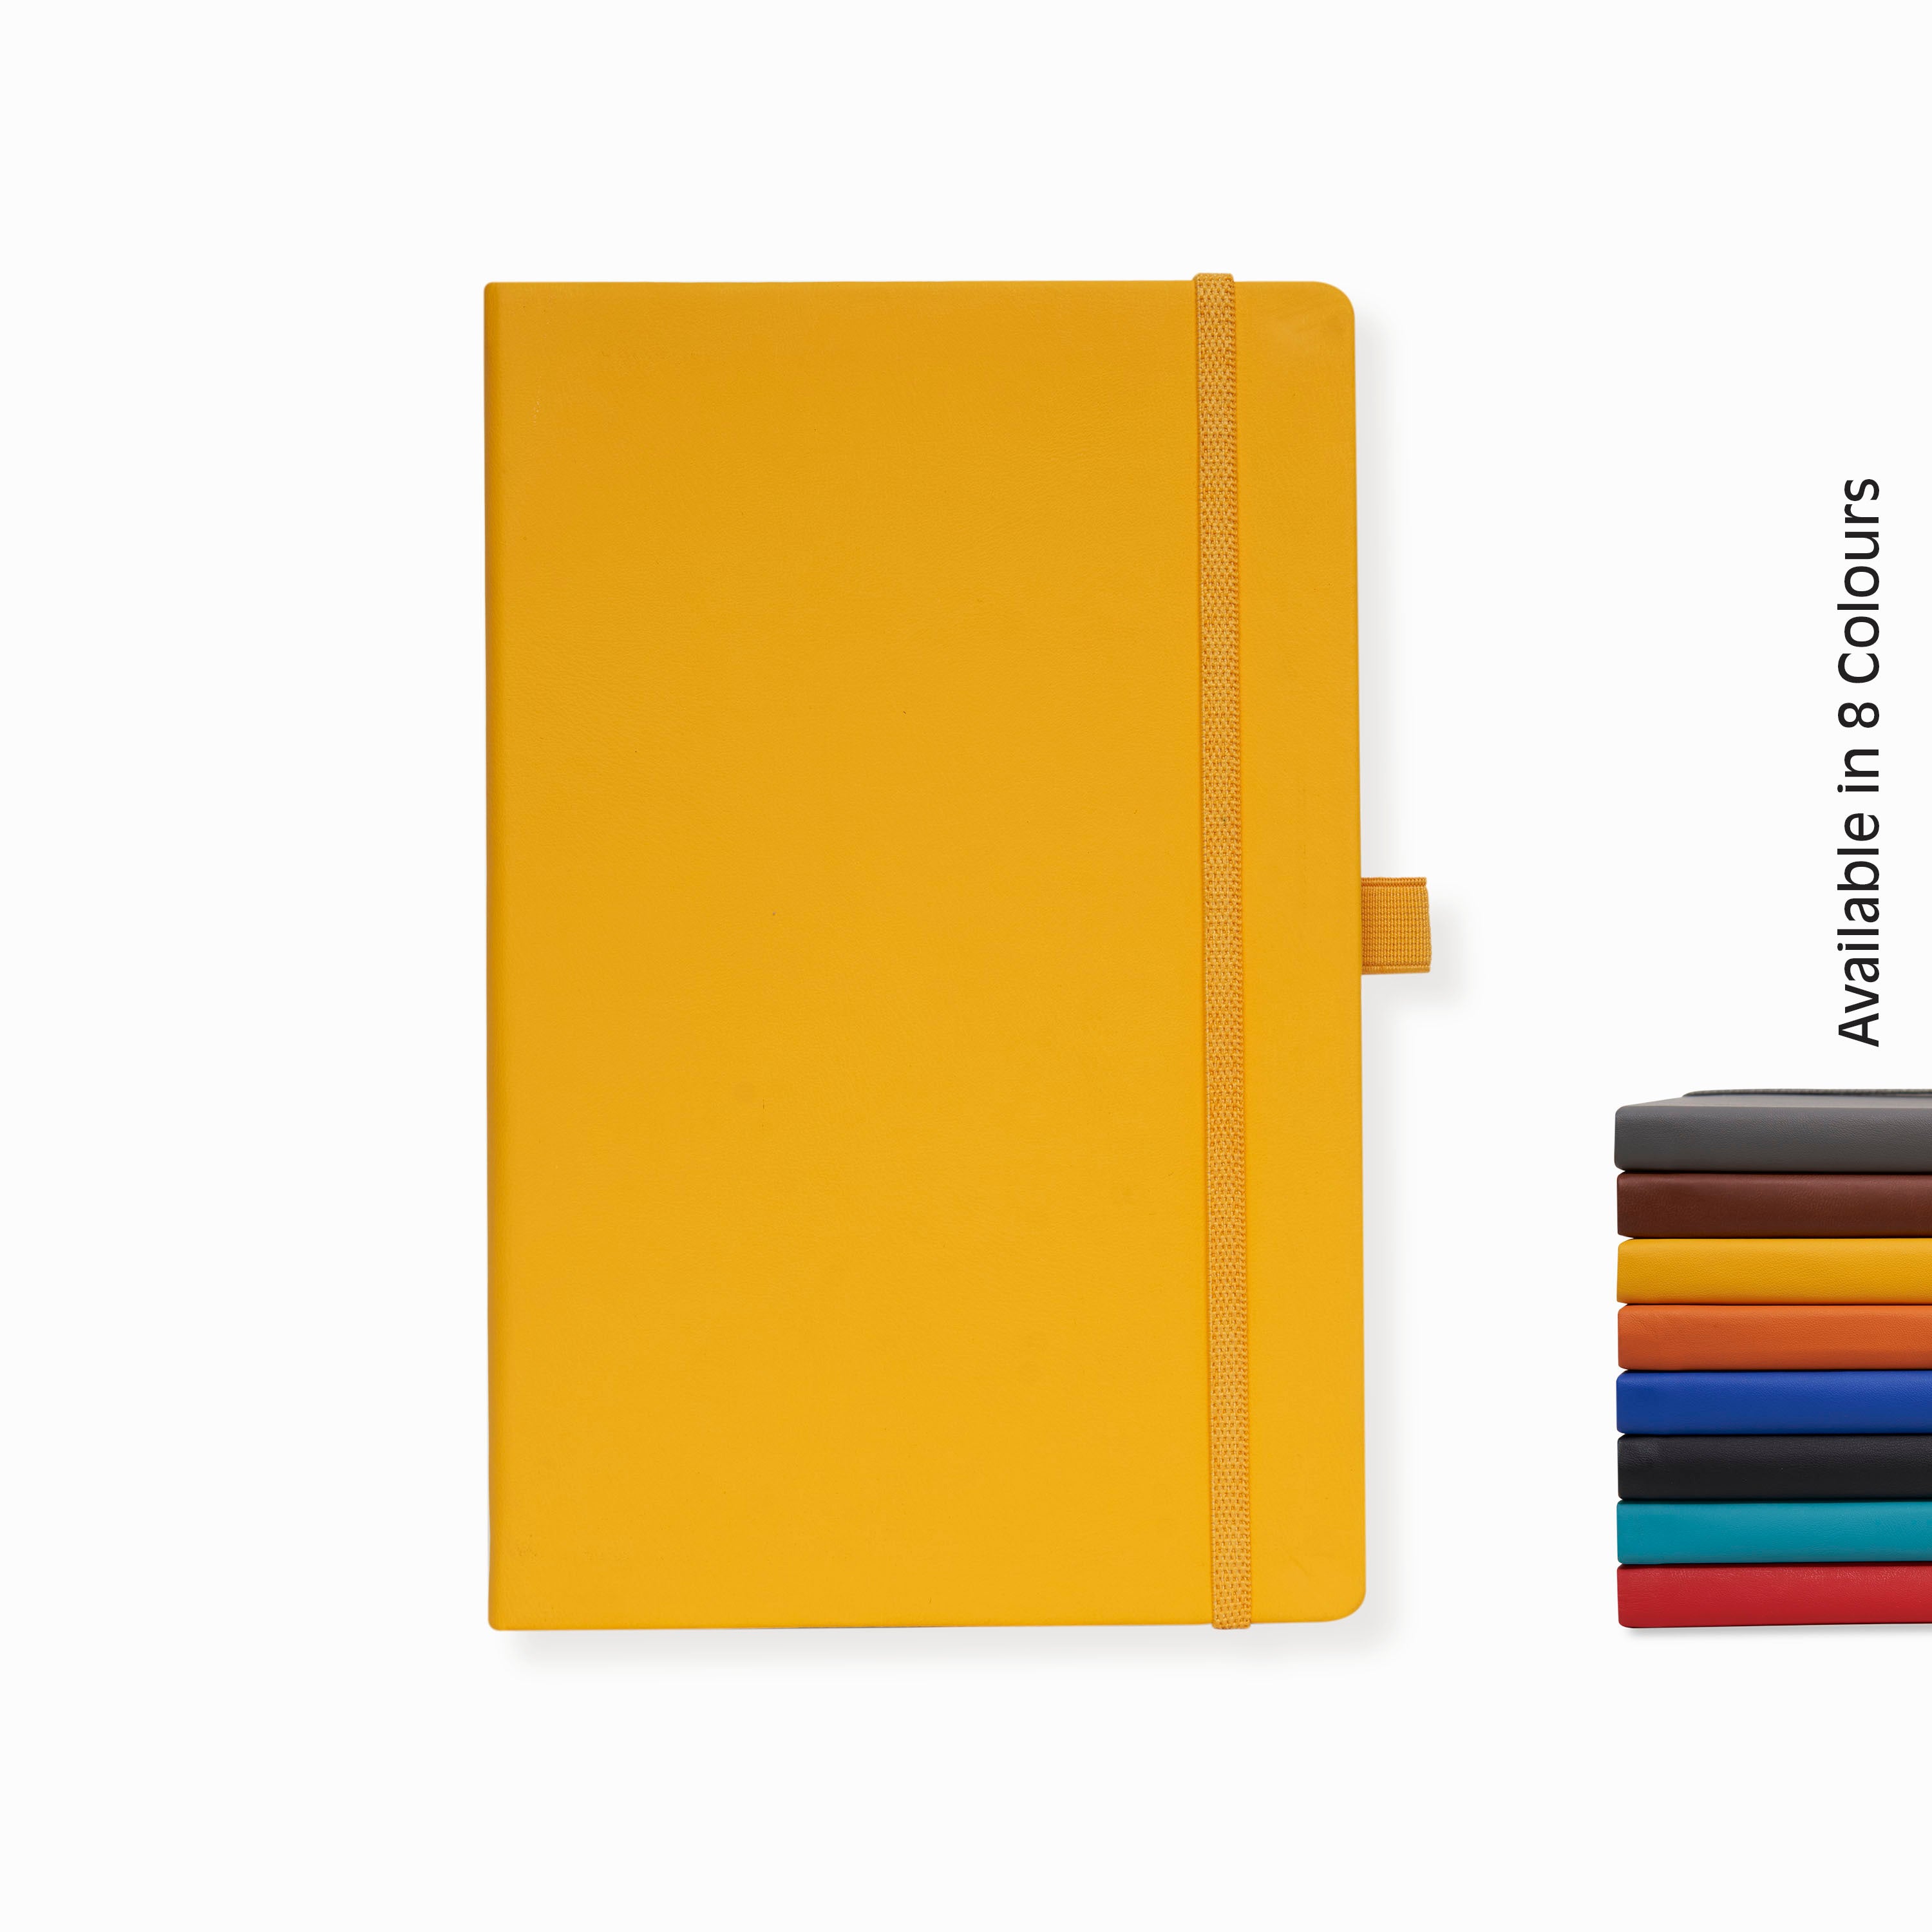 Pro Series Executive A5 PU Leather Hardbound Ruled Diary with Pen Loop - YELLOW